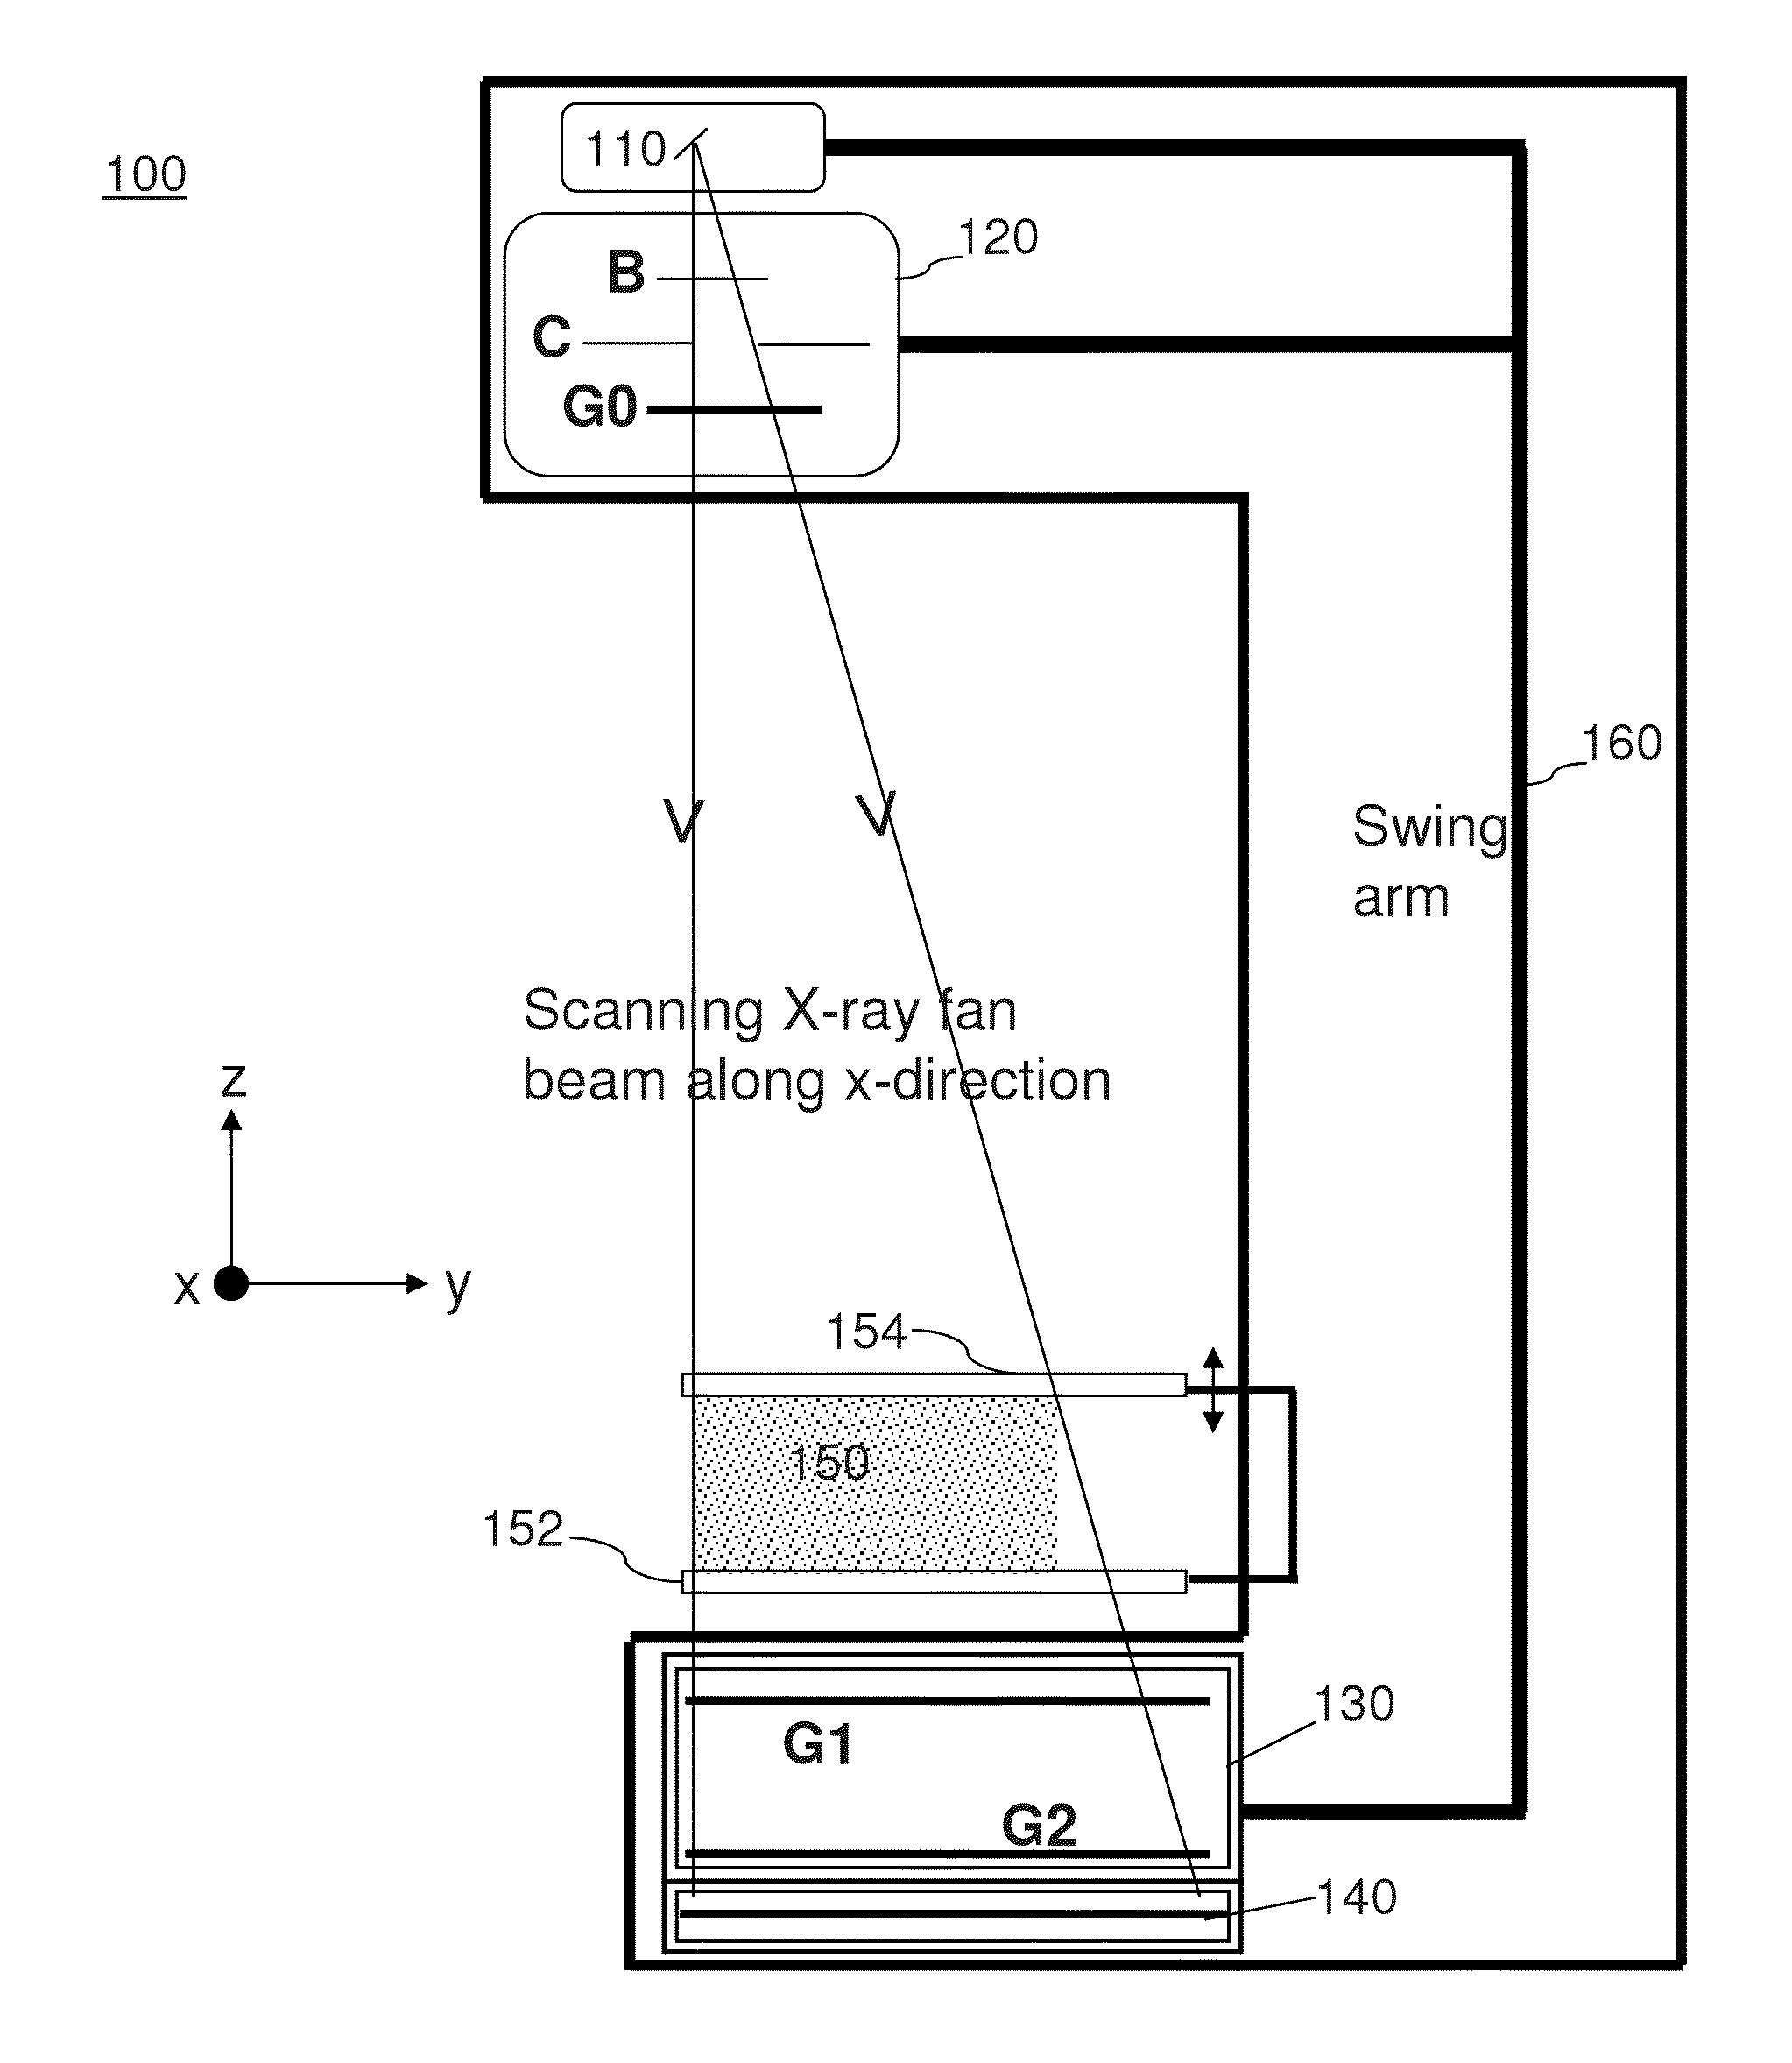 Grating-based differential phase contrast imaging system with adjustable capture technique for medical radiographic imaging